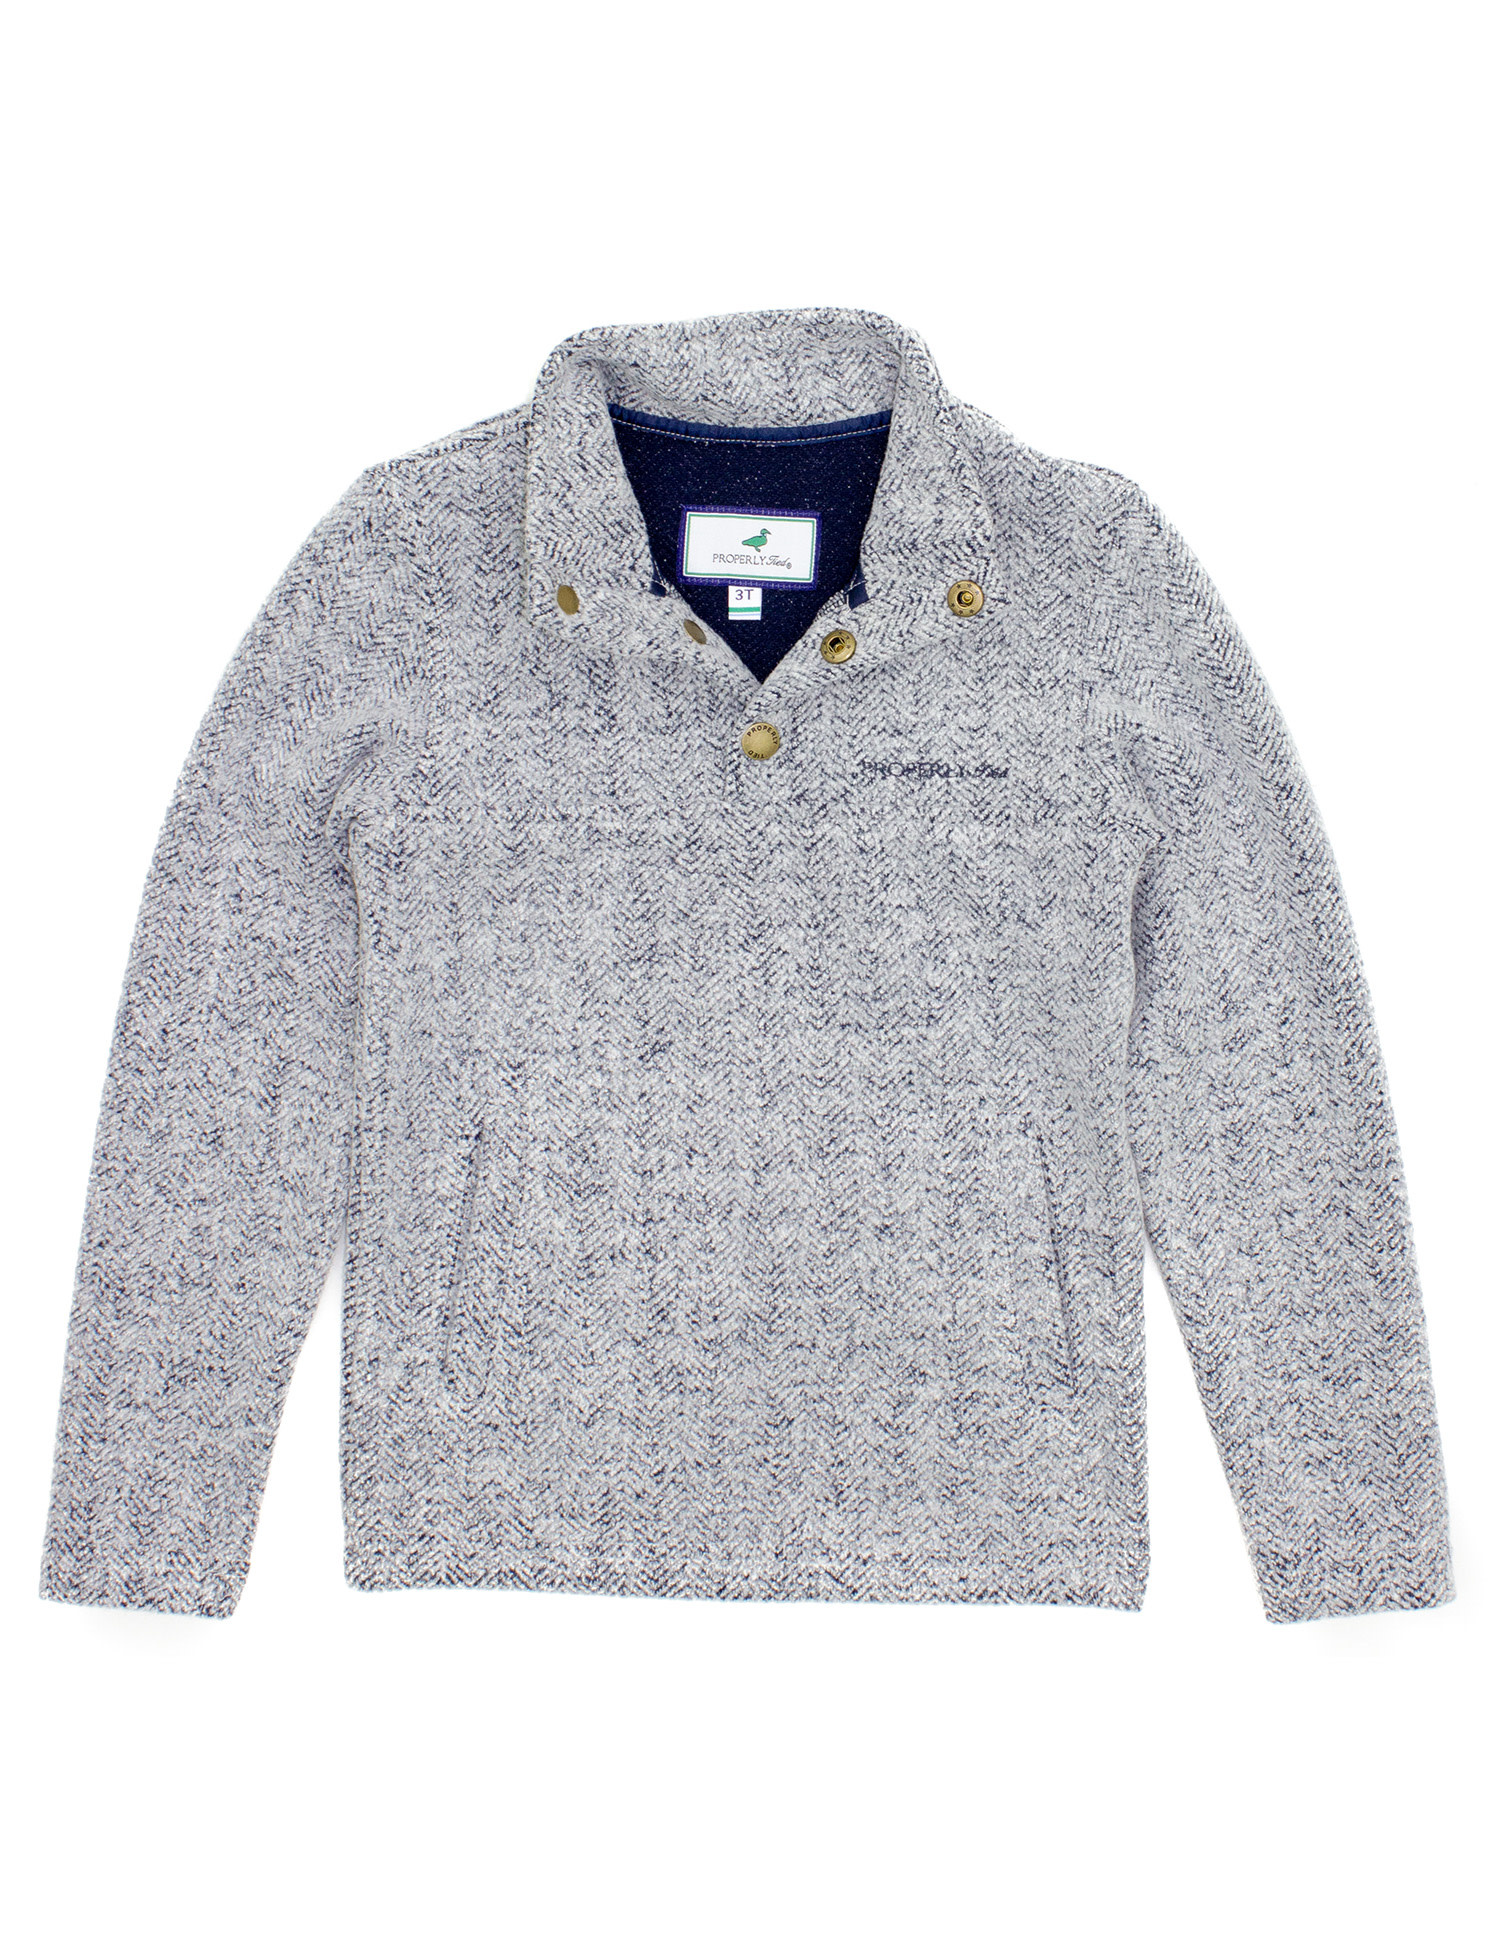 Properly Tied Boy Upland Pullover